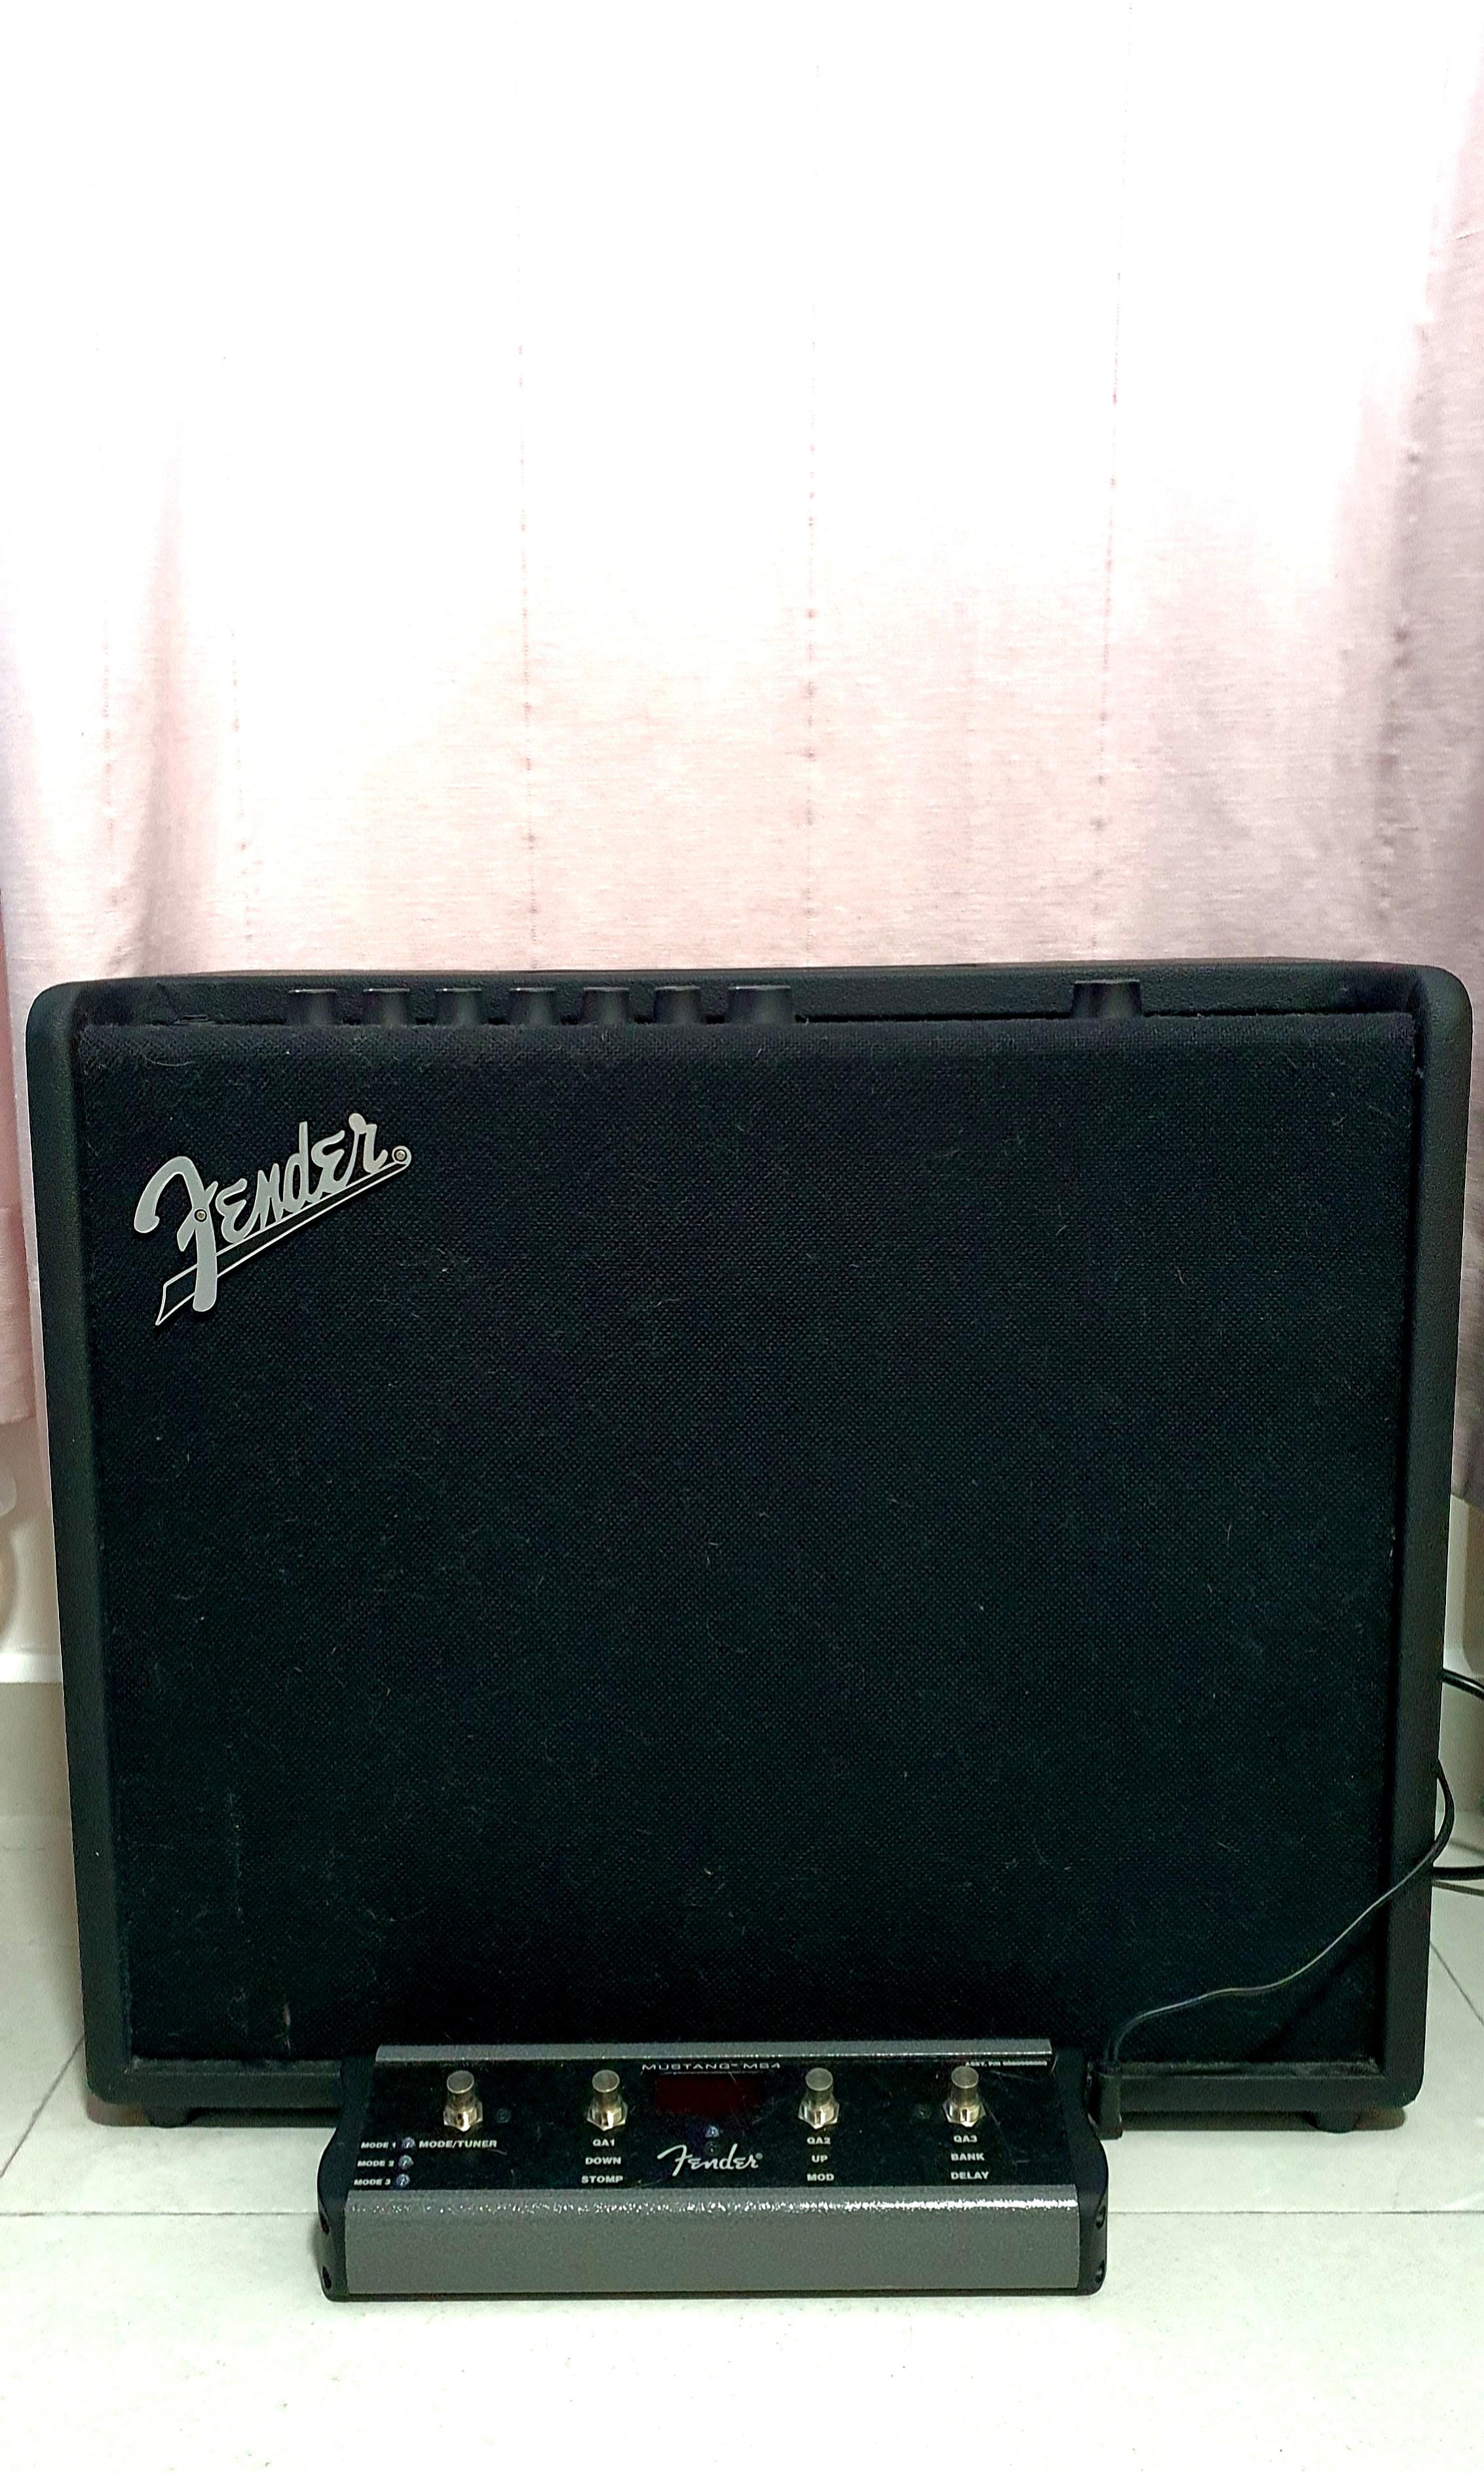 Fender Mustang Gt100 V2 Amplifier With Mgt 4 Footswitch Hobbies Toys Music Media Musical Instruments On Carousell